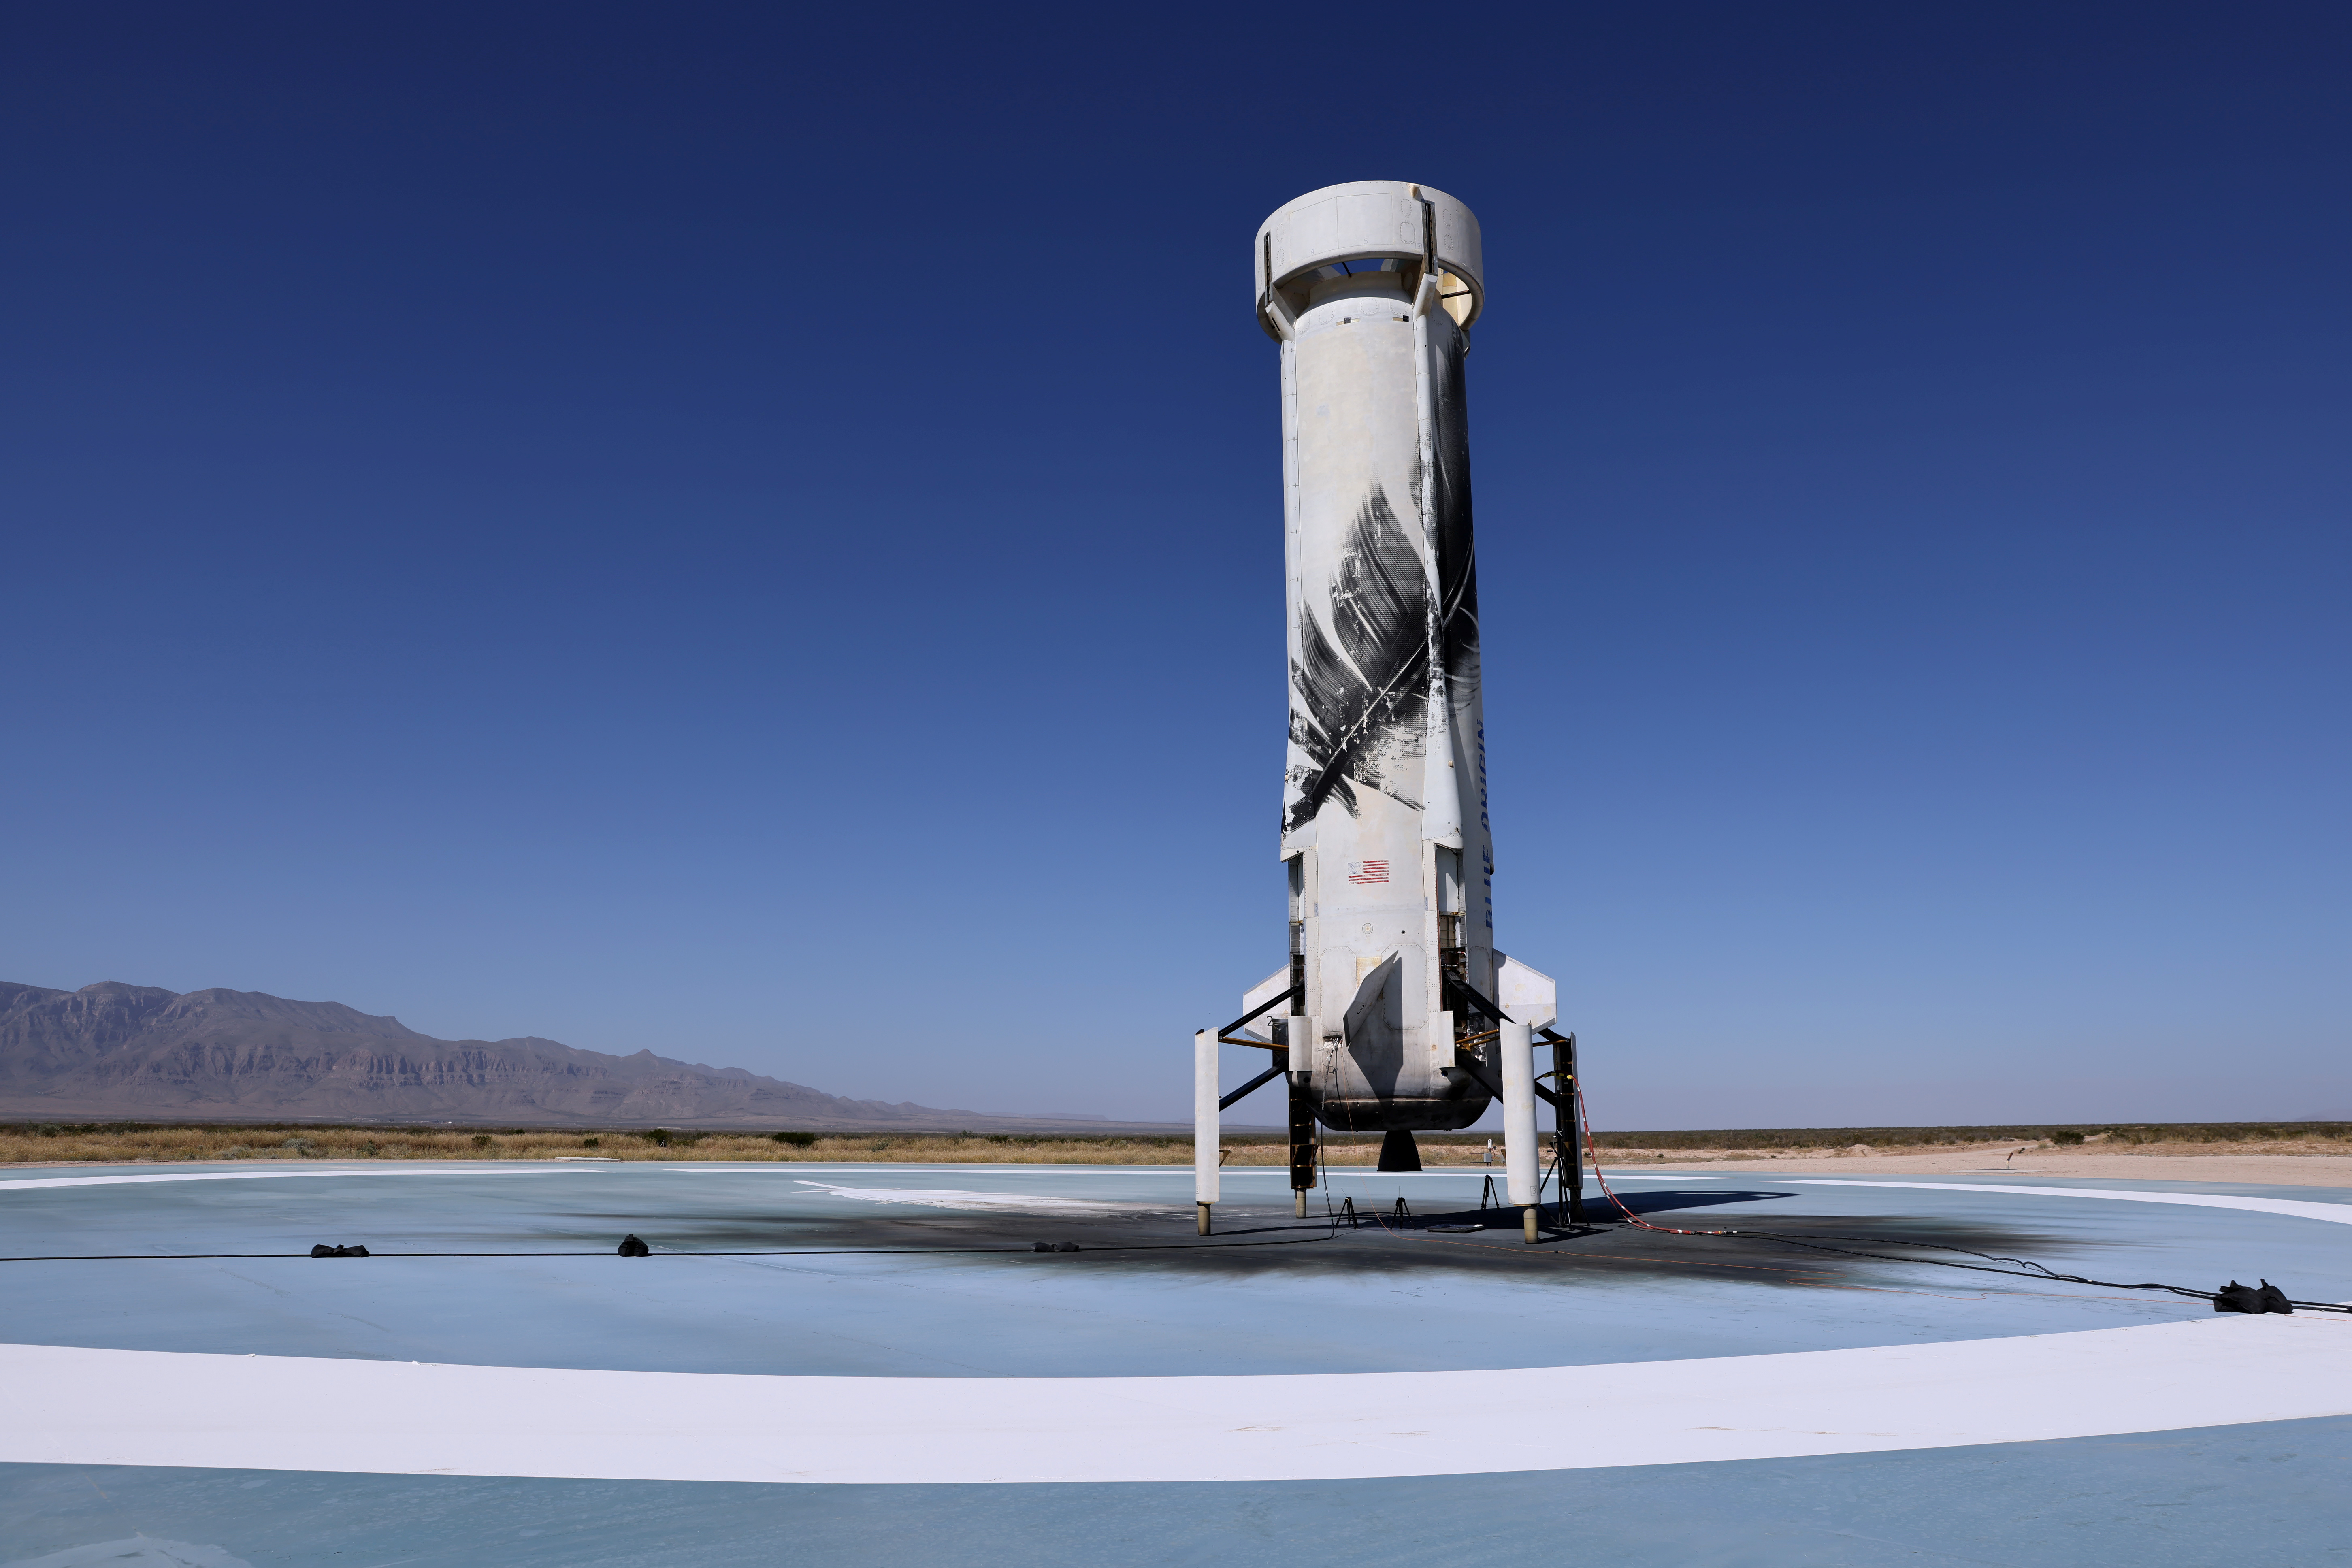 Blue Origin's reusable rocket engine New Shepard is seen on a landing pad after carrying a capsule with Star Trek actor William Shatner, 90, and three others on billionaire Jeff Bezos's company's second suborbital tourism flight near Van Horn, Texas, U.S., October 13, 2021. REUTERS/Mike Blake